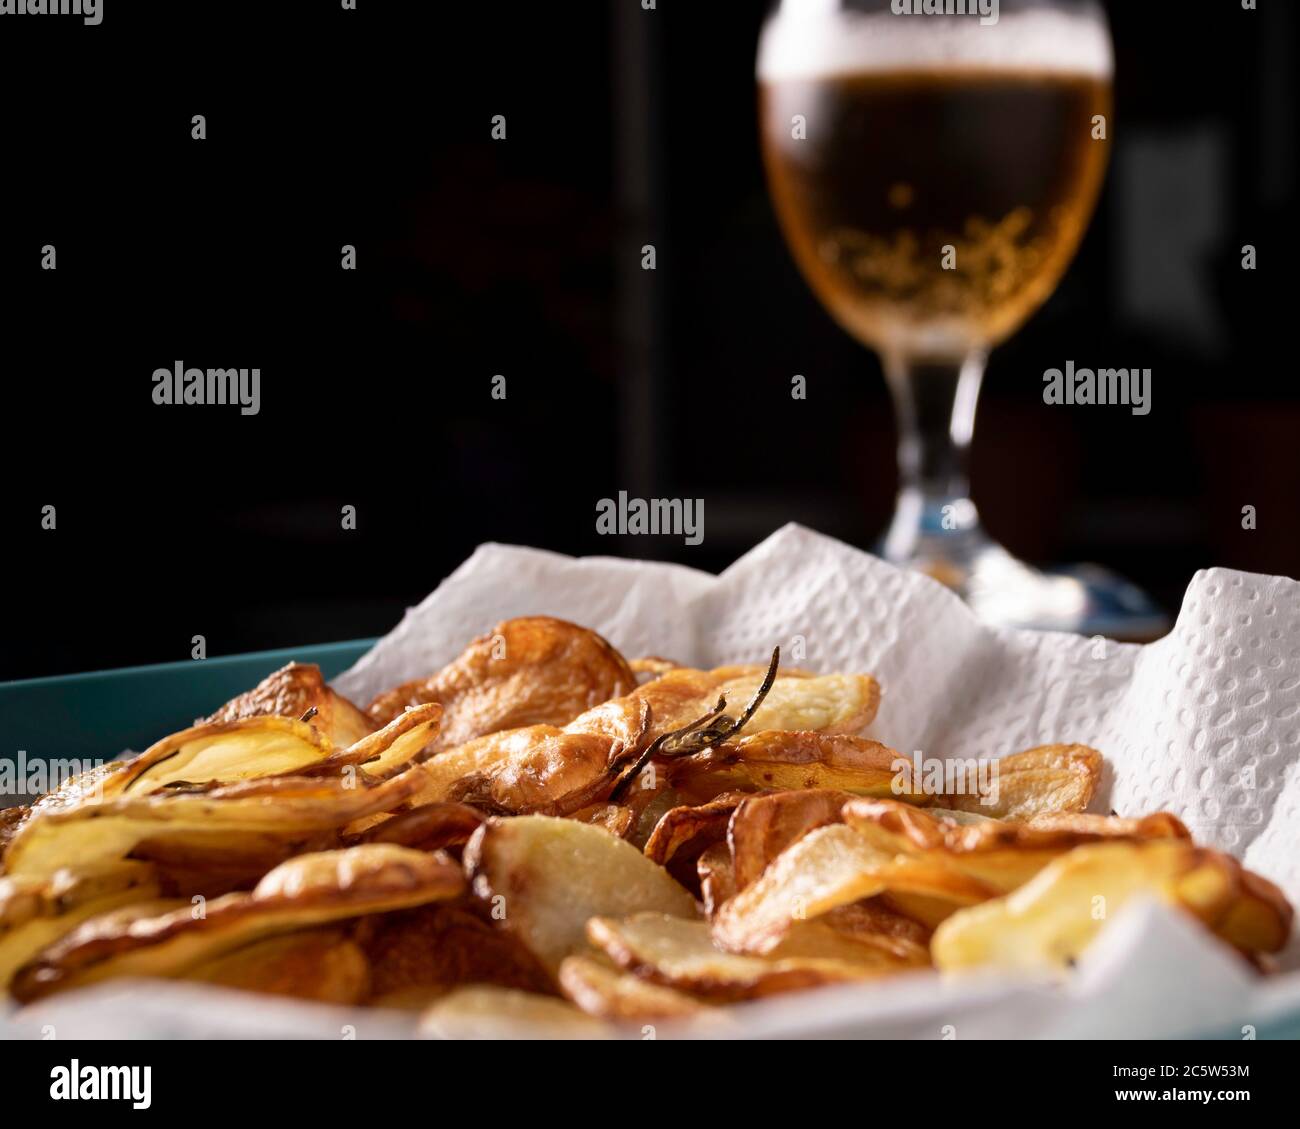 french fries with beer Stock Photo